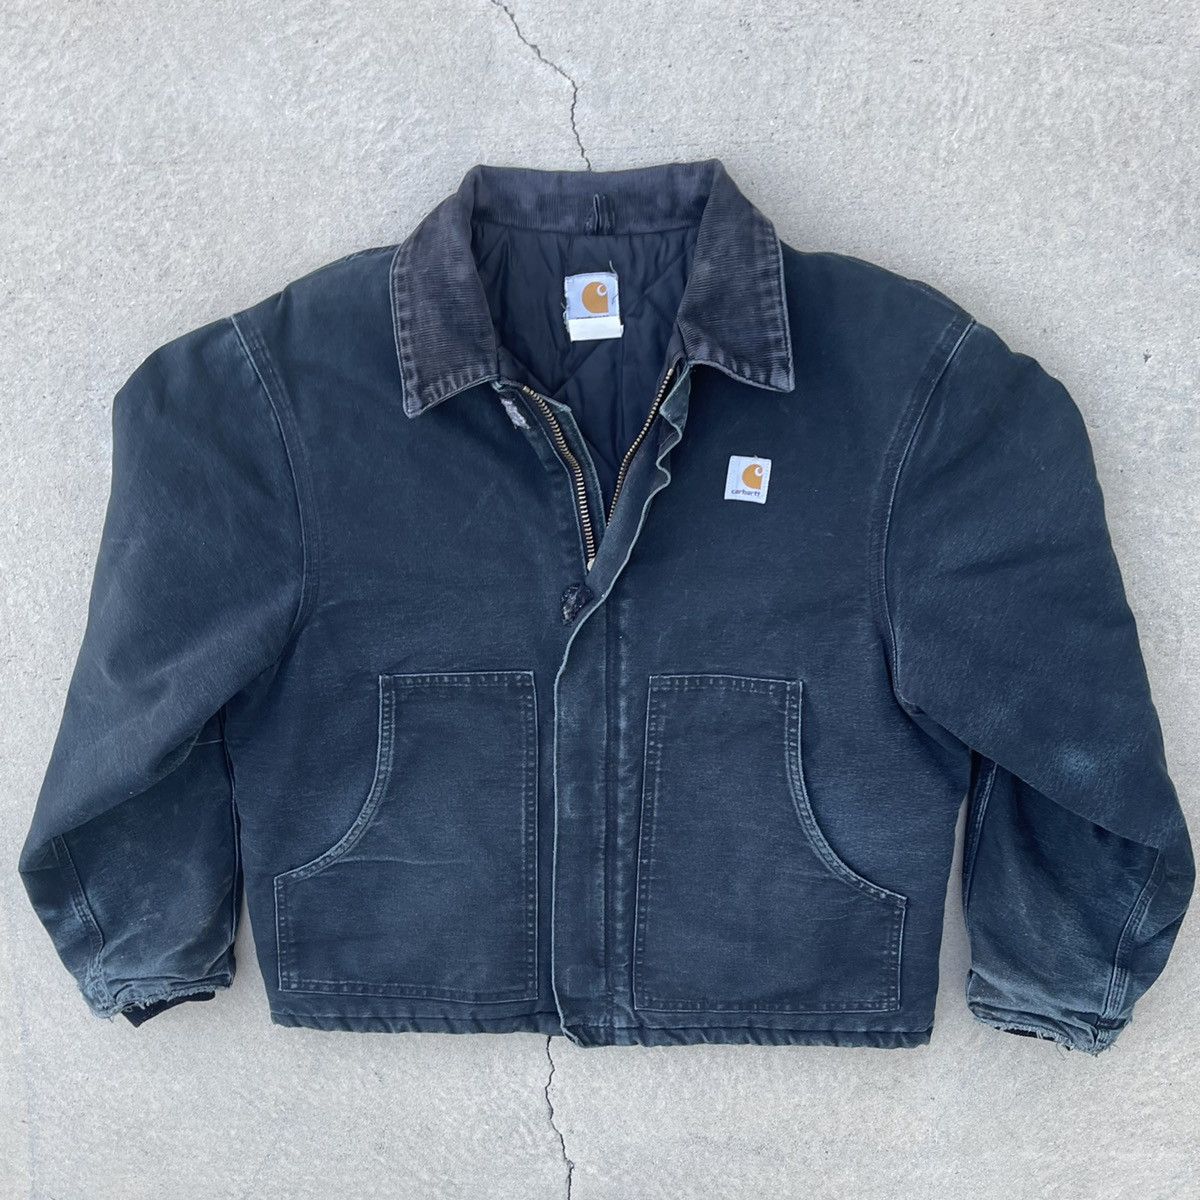 Vintage 90’s Faded & Distressed Quilted Canvas Jacket w/ Corduroy L Size US L / EU 52-54 / 3 - 1 Preview